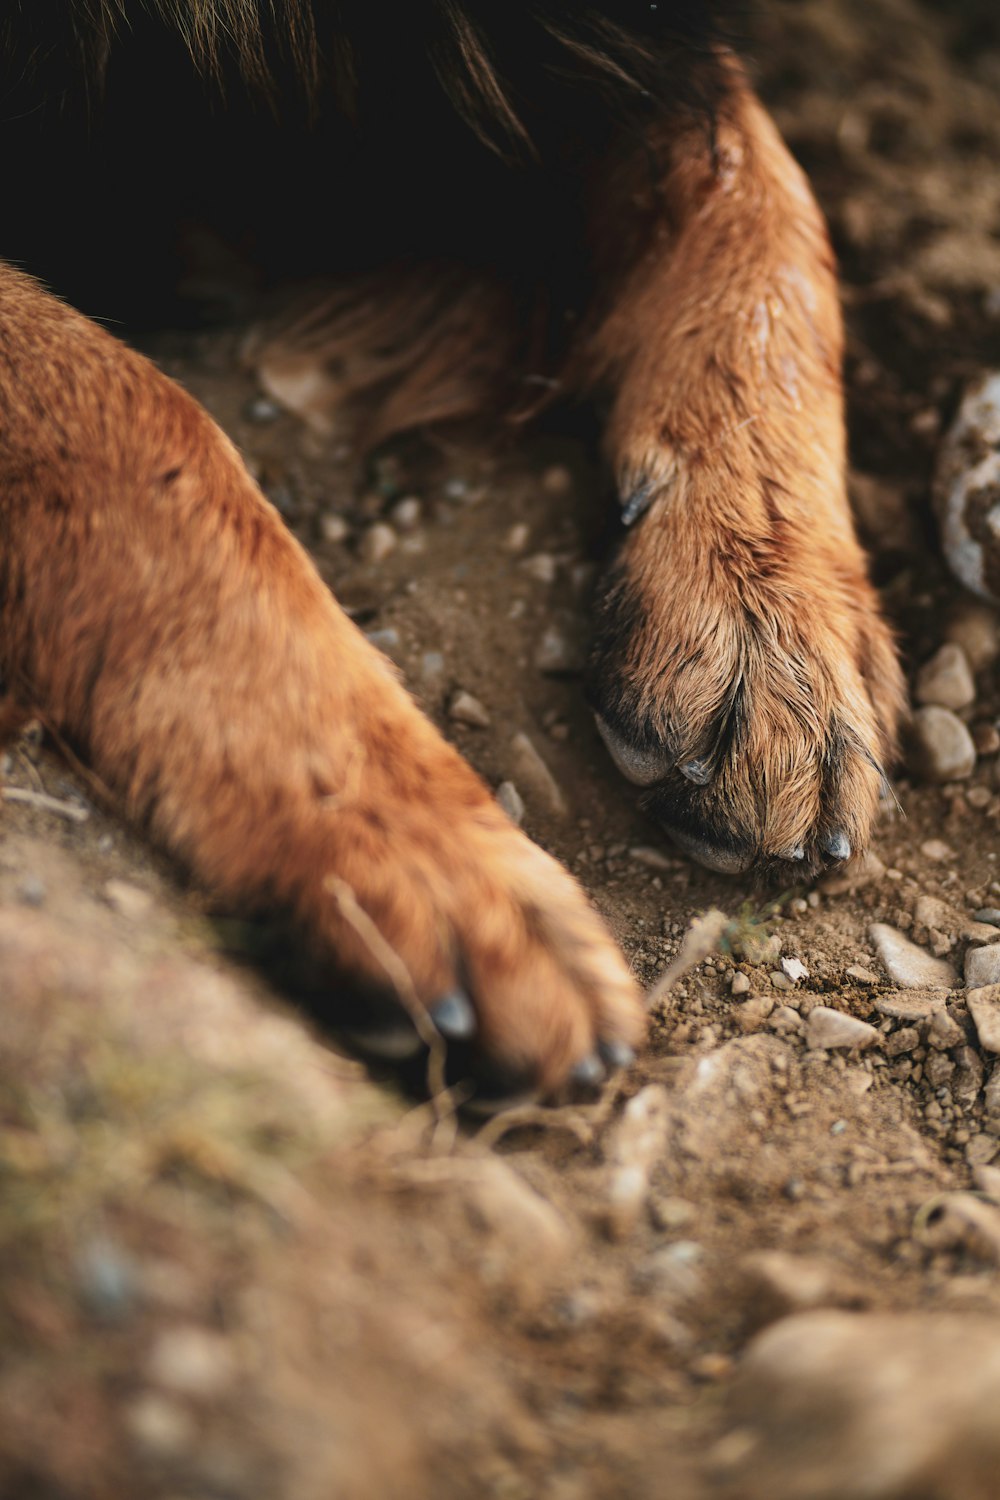 a close up of a dog's paws and paw